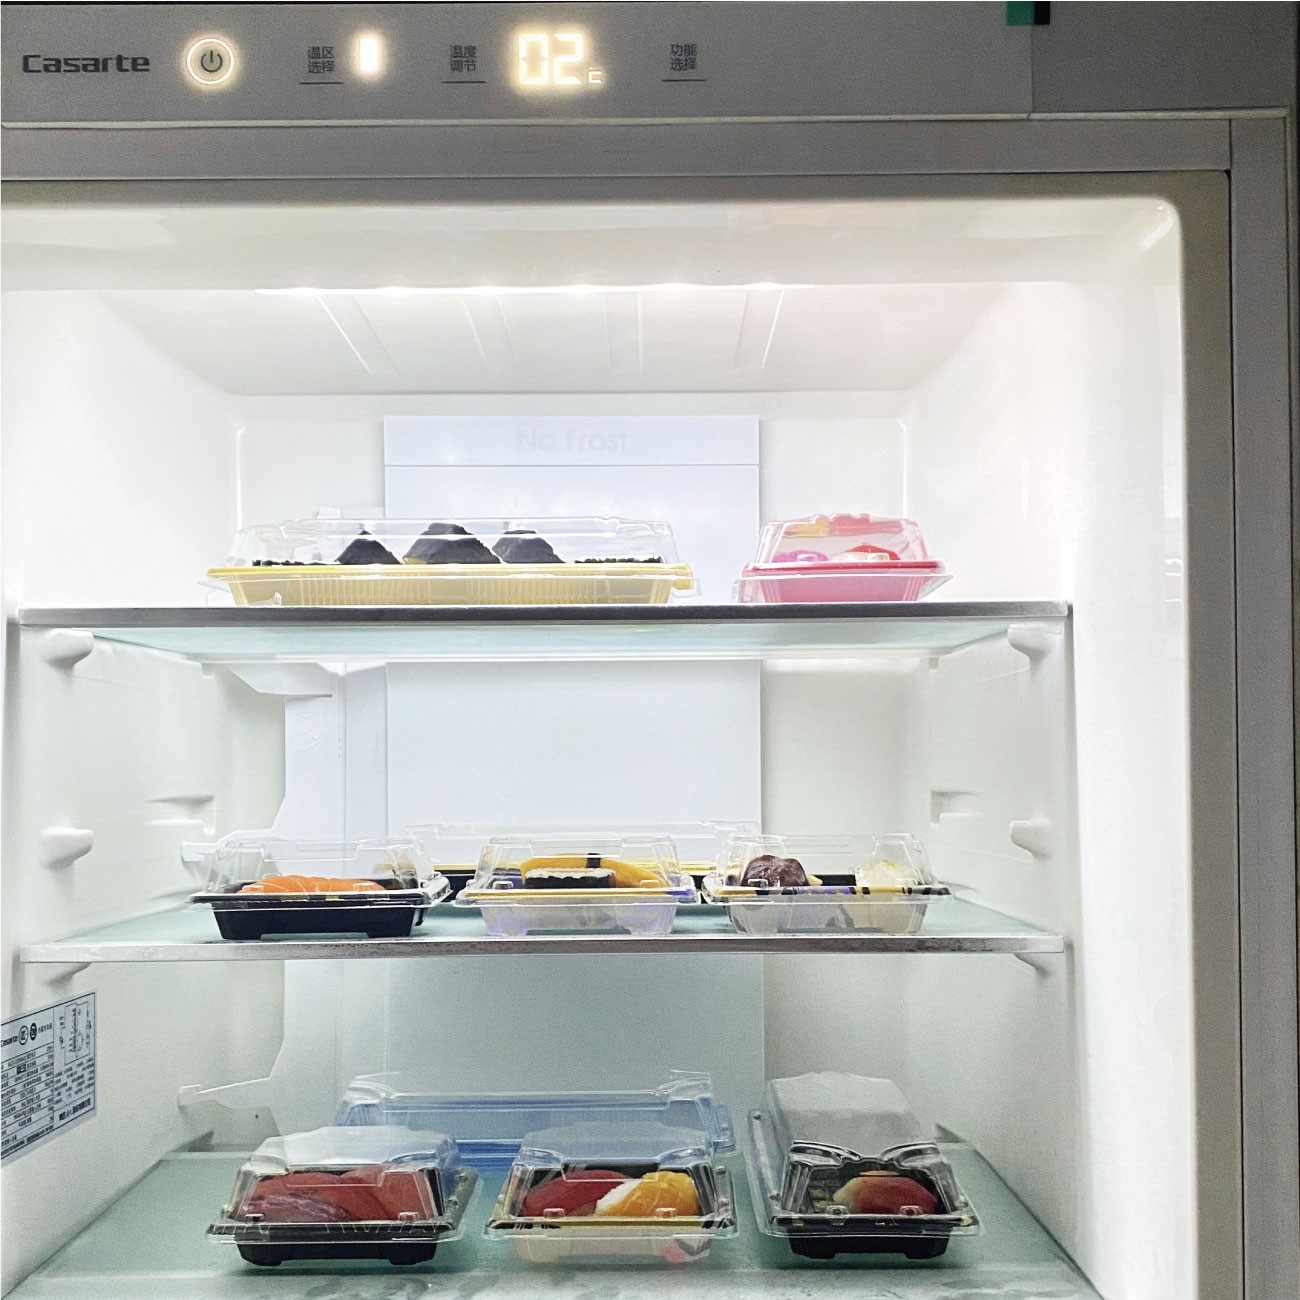 There are some sushi plates WL-09 in the refrigerator, which can be used for refrigeration.